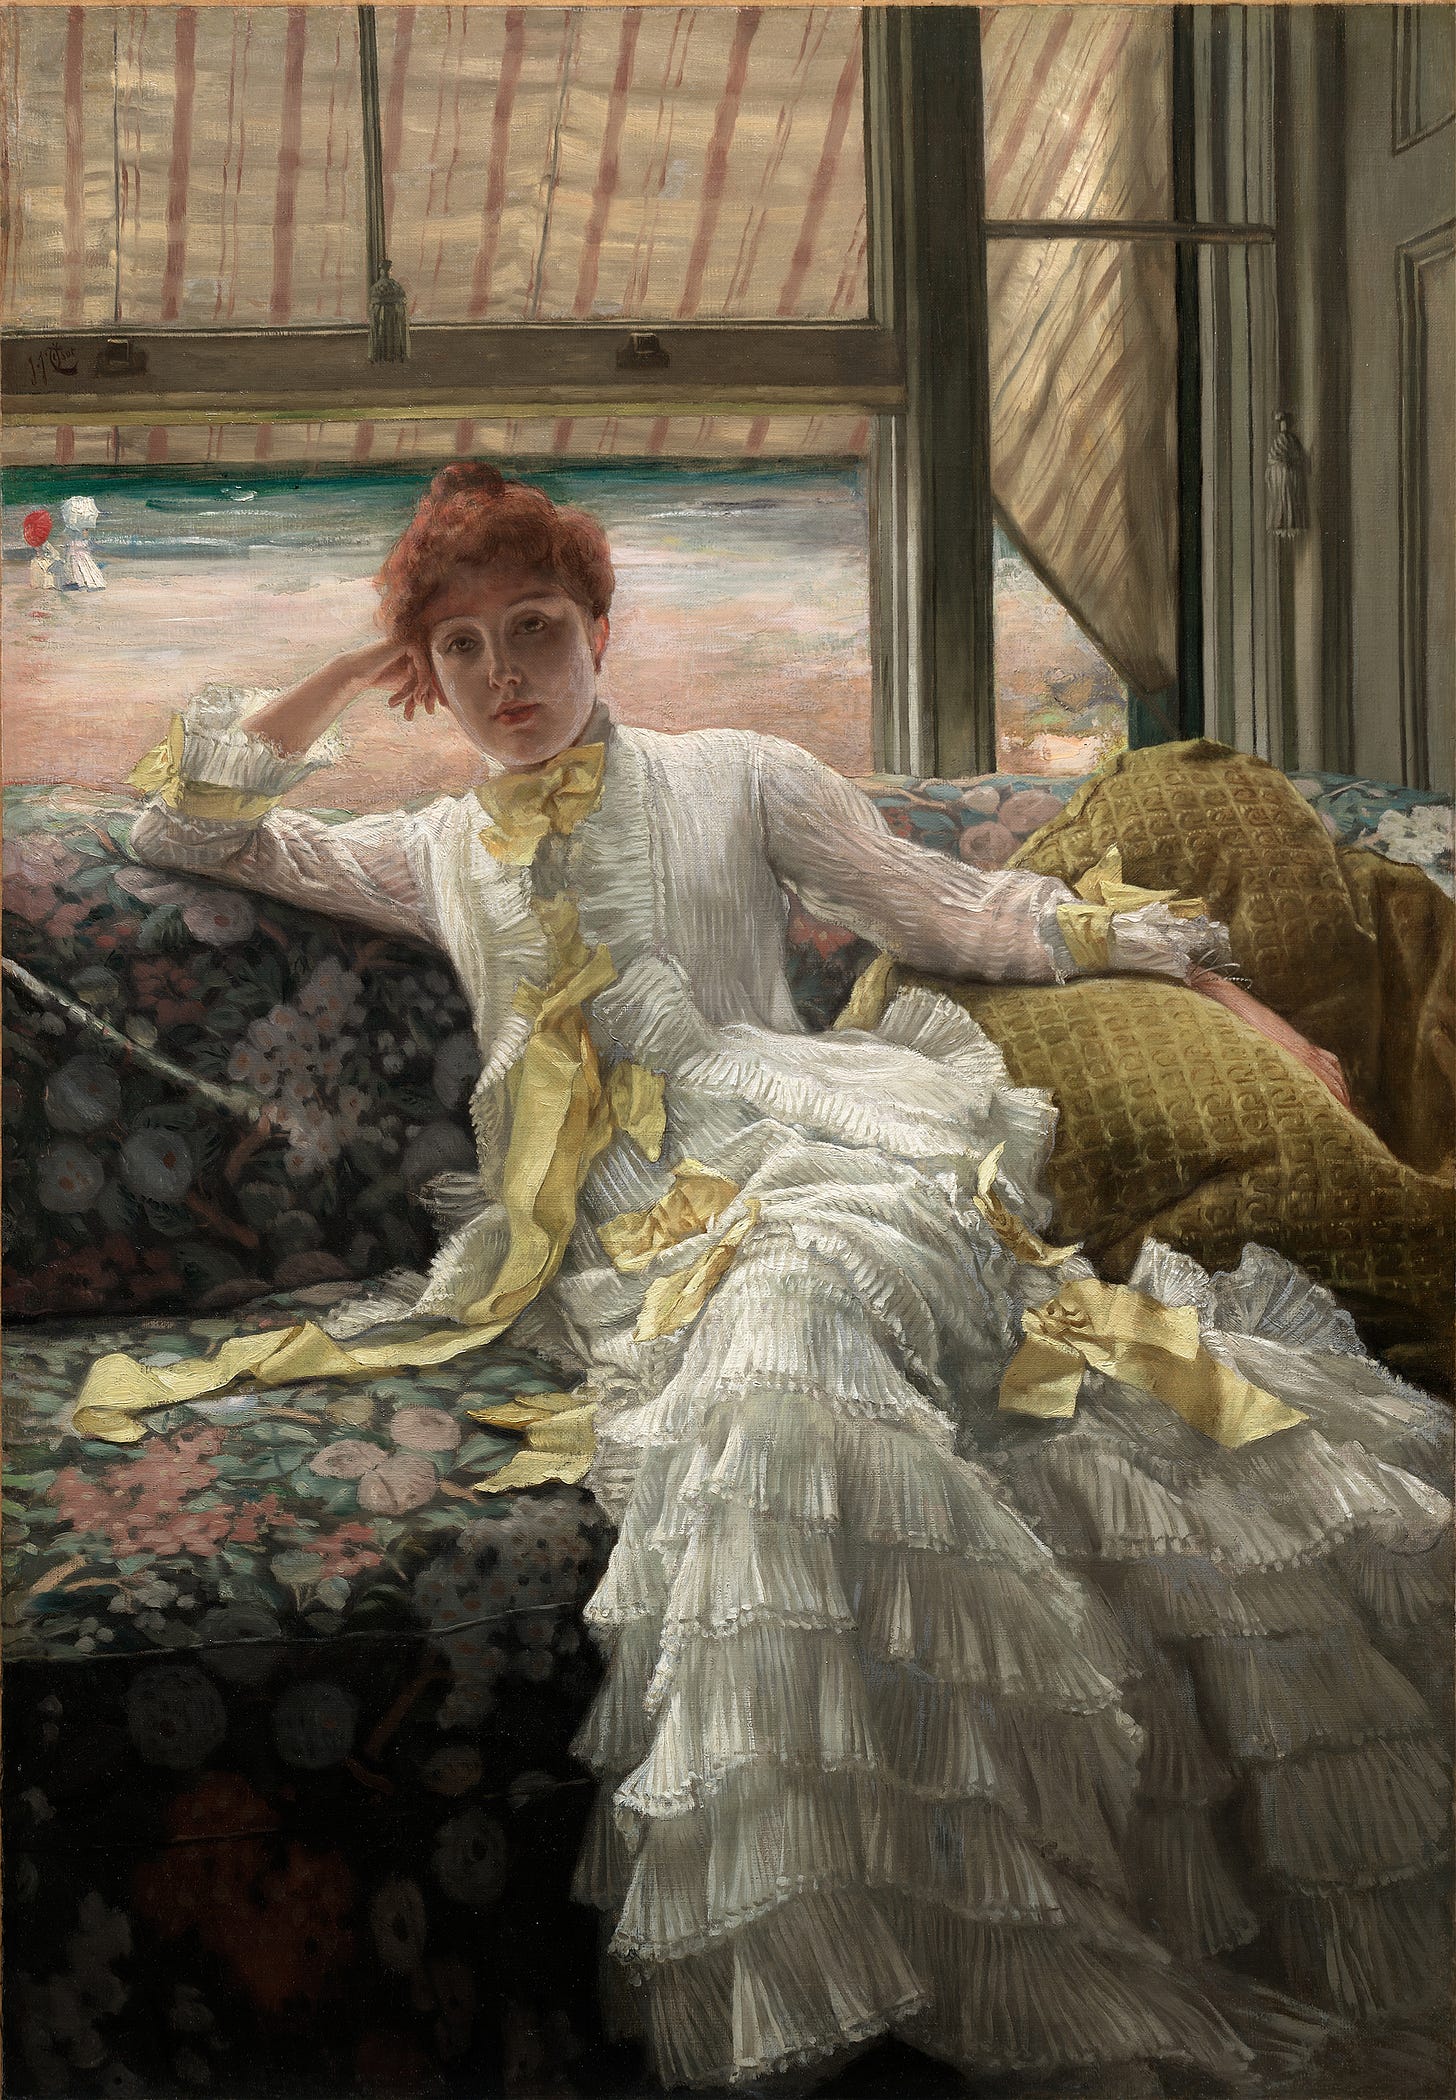 Seaside (1878) by James Tissot (French, 1836-1902)